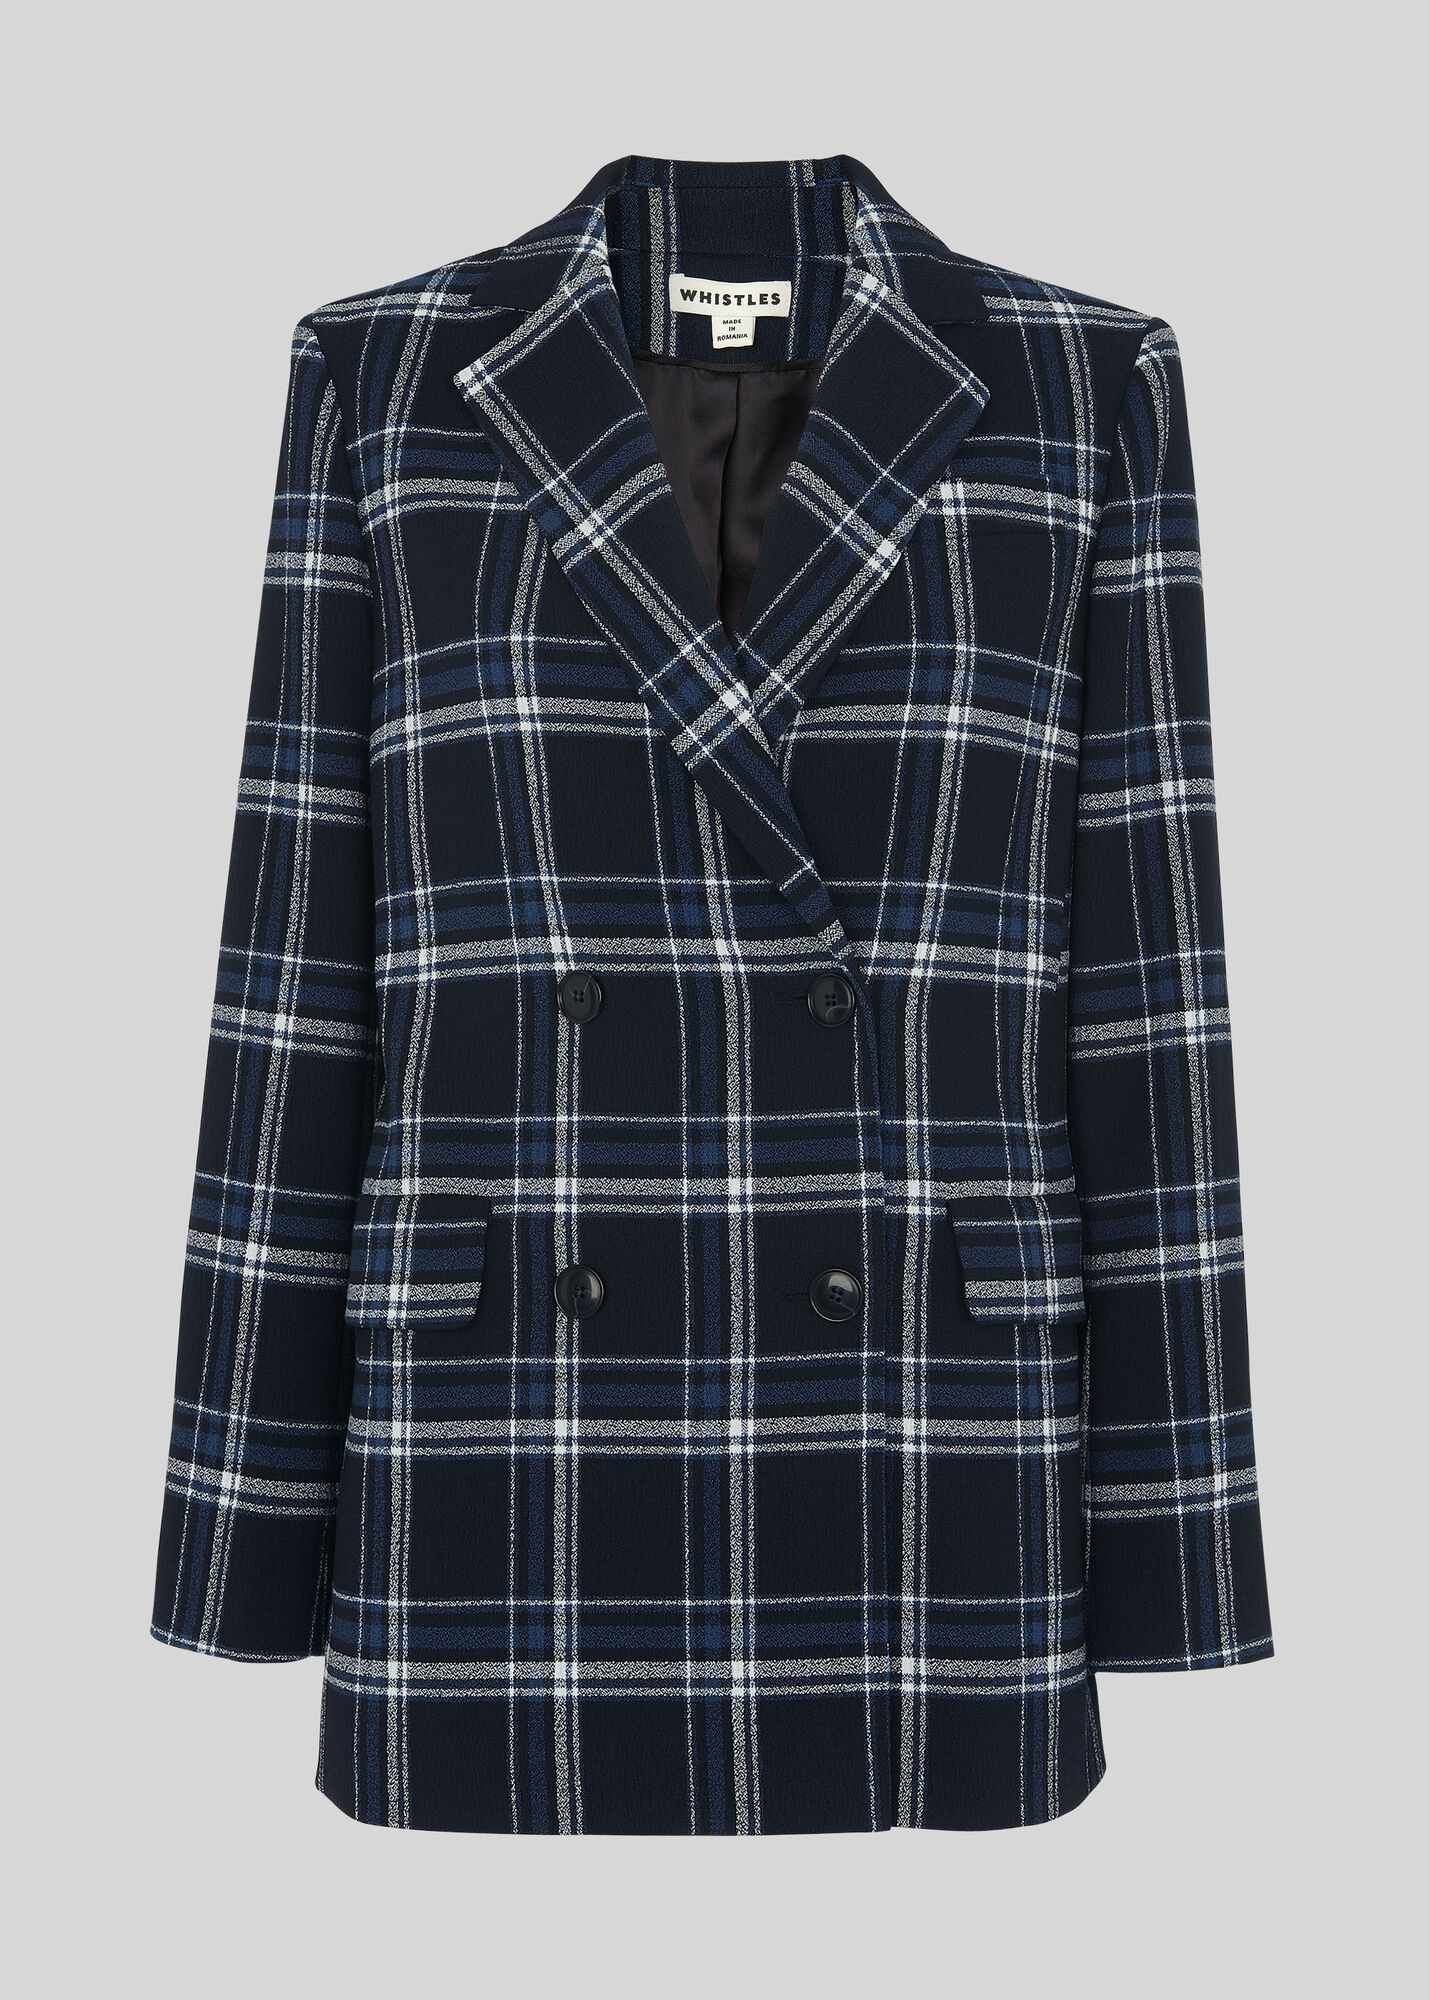 Navy/Multi Check Double Breasted Blazer | WHISTLES